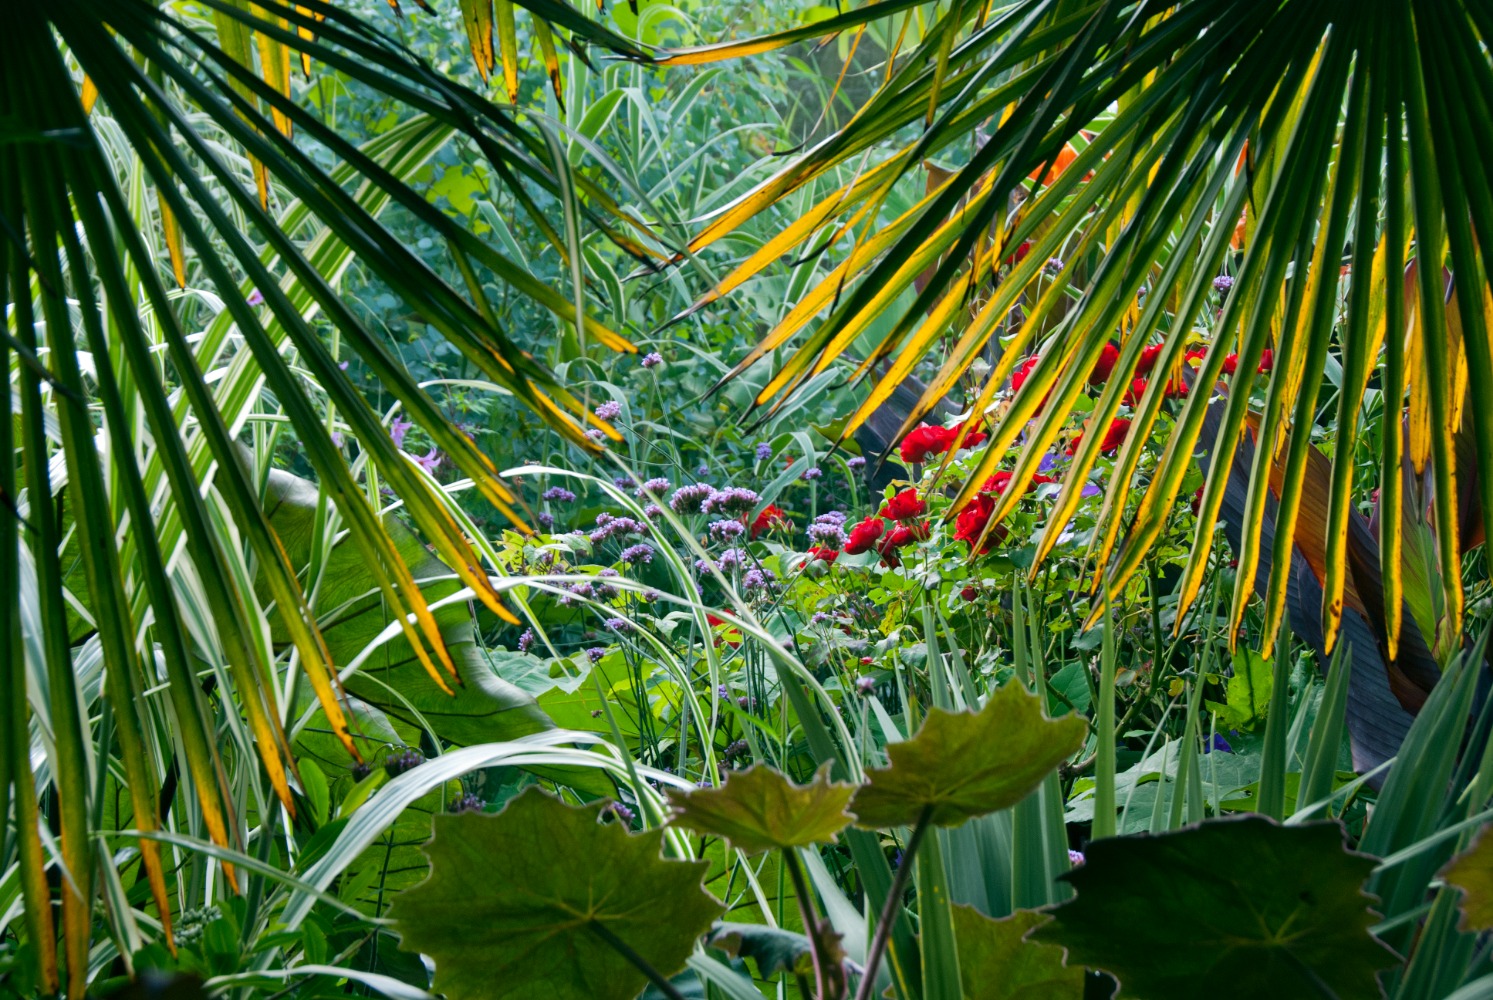 Gardening with subtropical plants